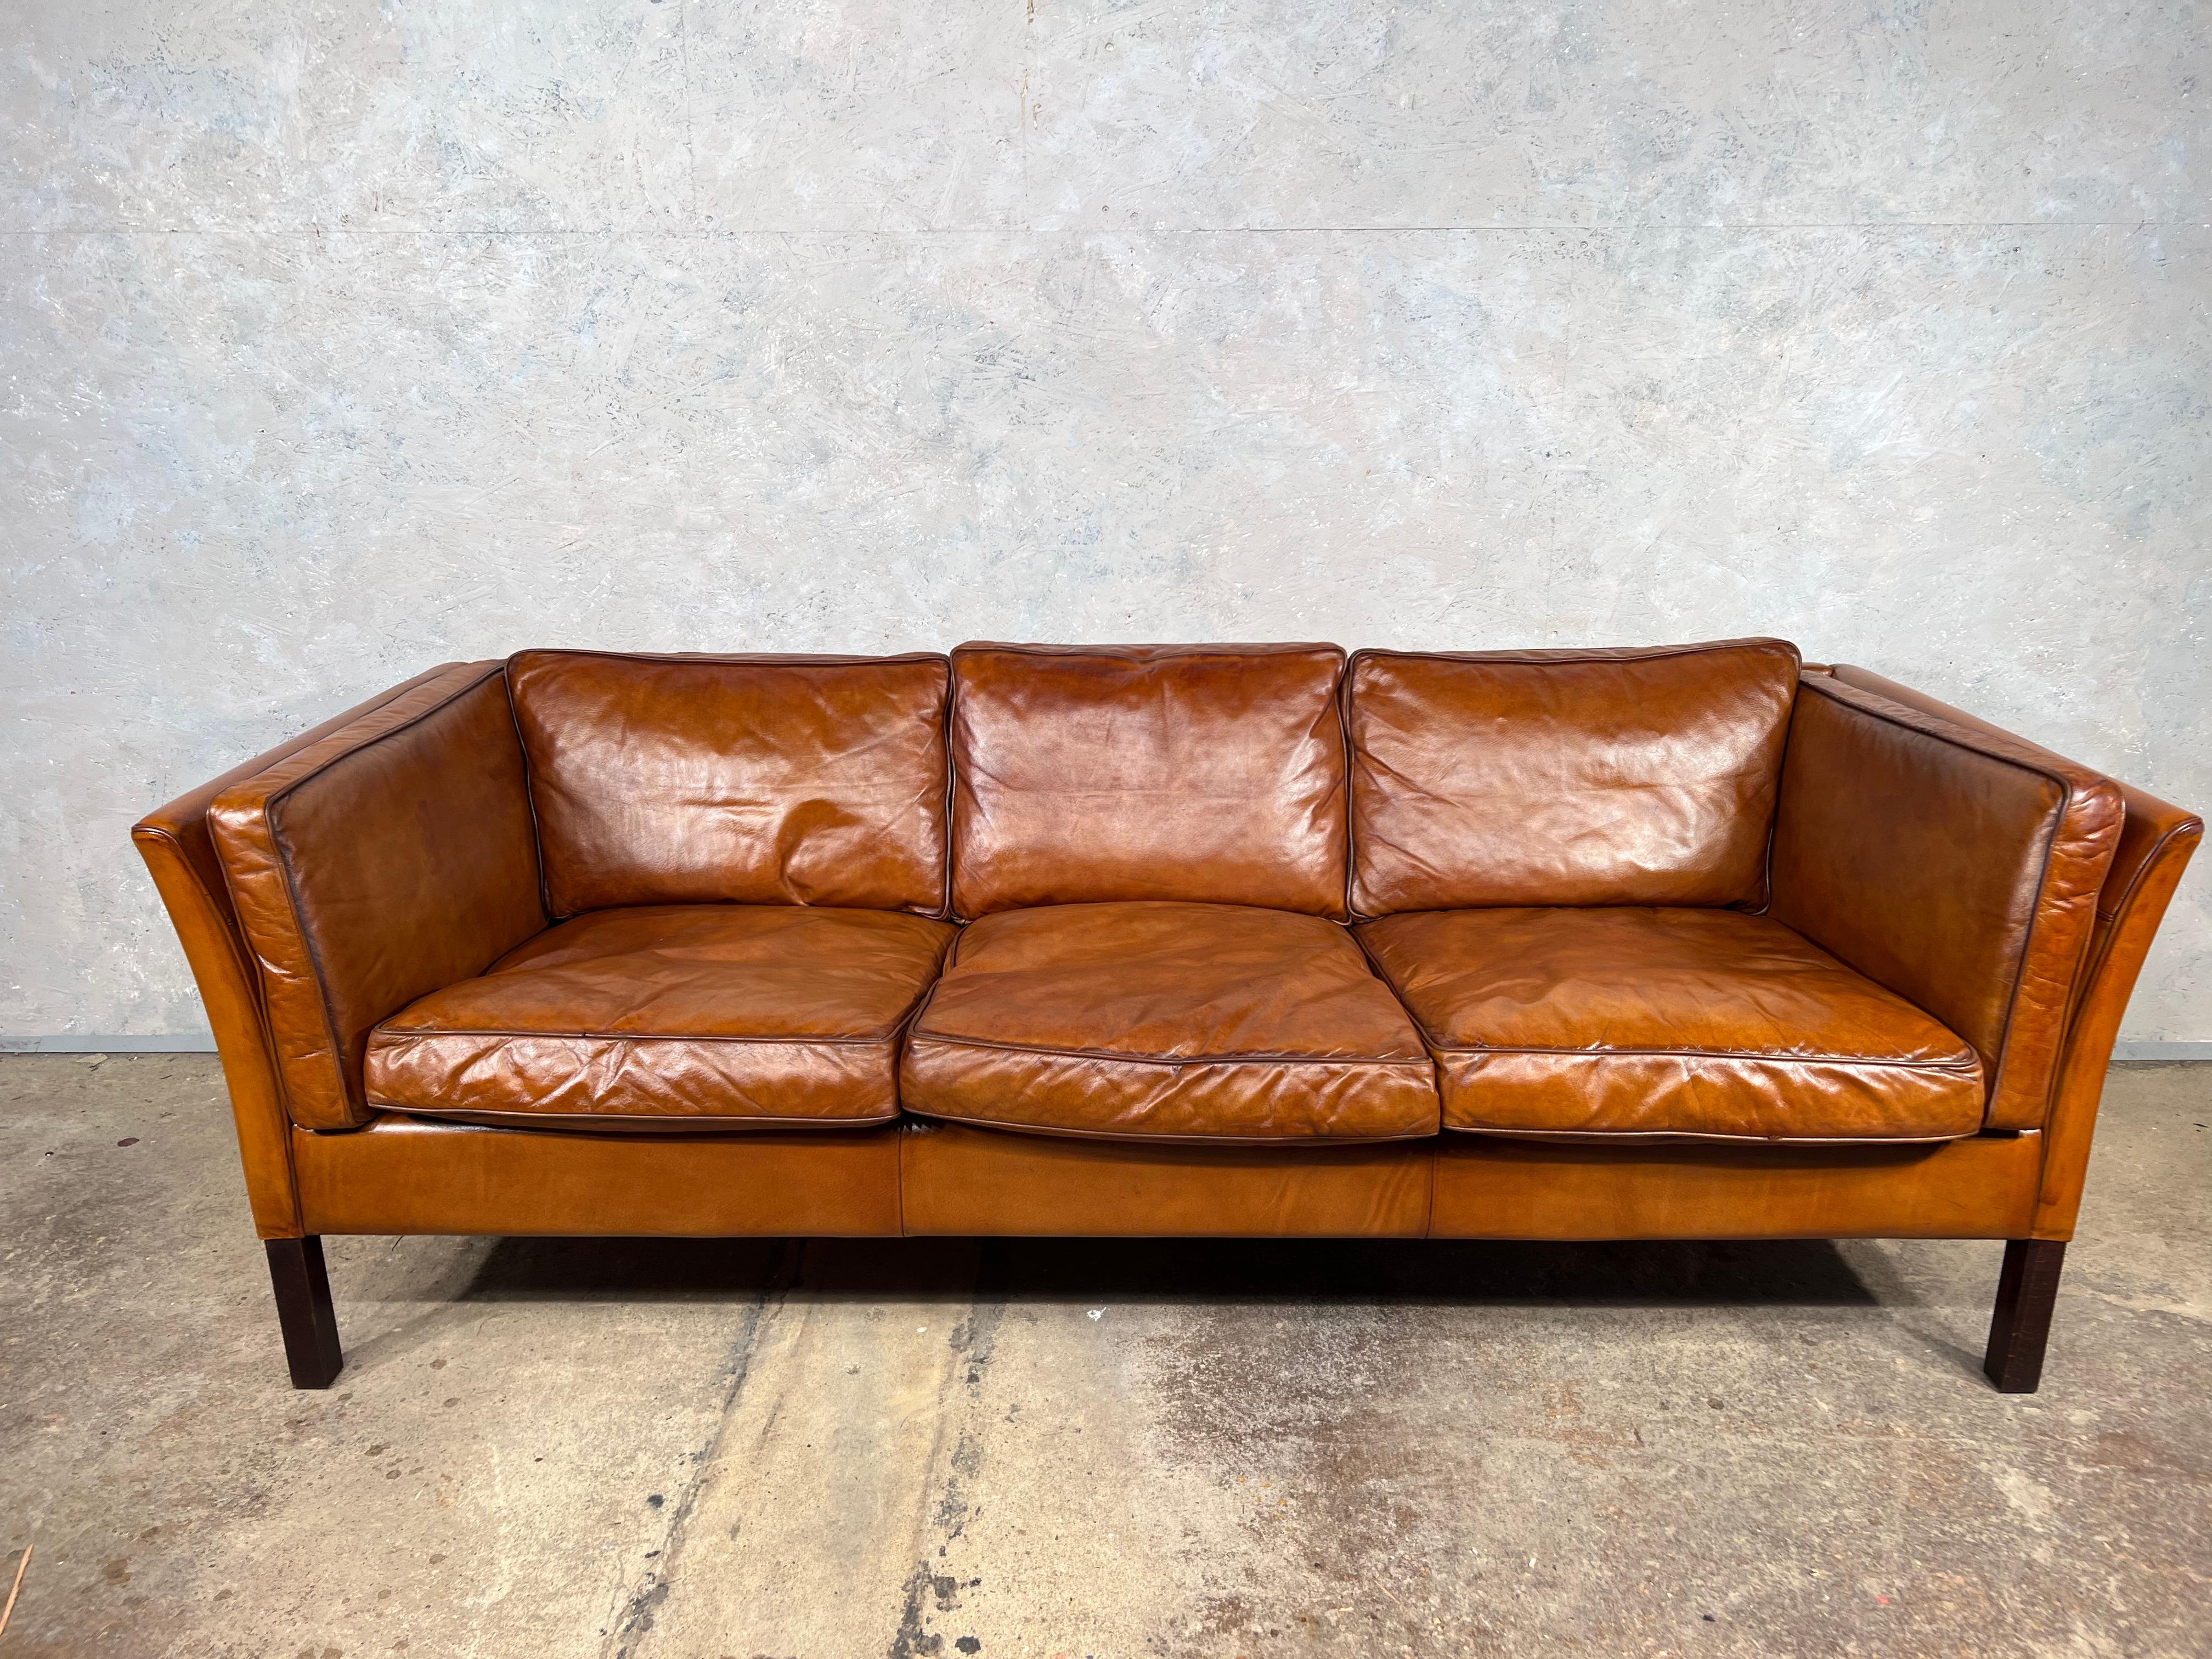 A Stunning Vintage Danish 70s Mid Century Tan Three Seater Leather Sofa.

Very stylish with a beautiful shape, great design, in great vintage condition, restored and hand dyed a beautiful tan colour and finish with great patina.

Viewings welcome at